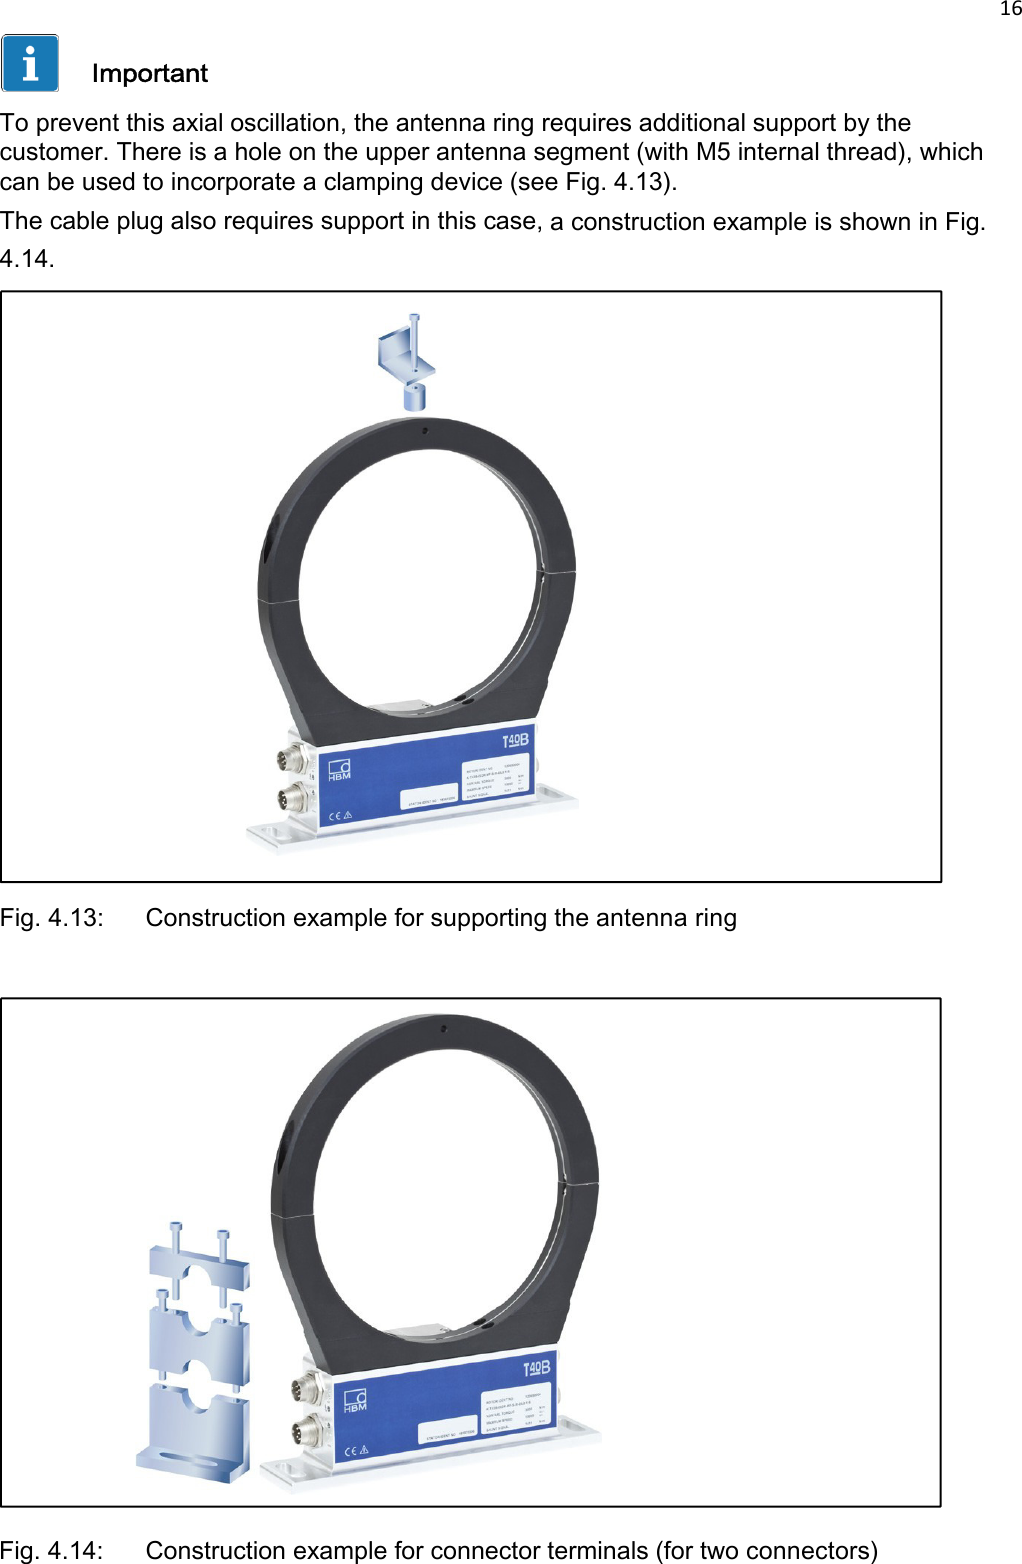 16   Important  To prevent this axial oscillation, the antenna ring requires additional support by the customer. There is a hole on the upper antenna segment (with M5 internal thread), which can be used to incorporate a clamping device (see Fig. 4.13). The cable plug also requires support in this case, a construction example is shown in Fig. 4.14.                               Fig. 4.13:   Construction example for supporting the antenna ring                              Fig. 4.14:   Construction example for connector terminals (for two connectors) 